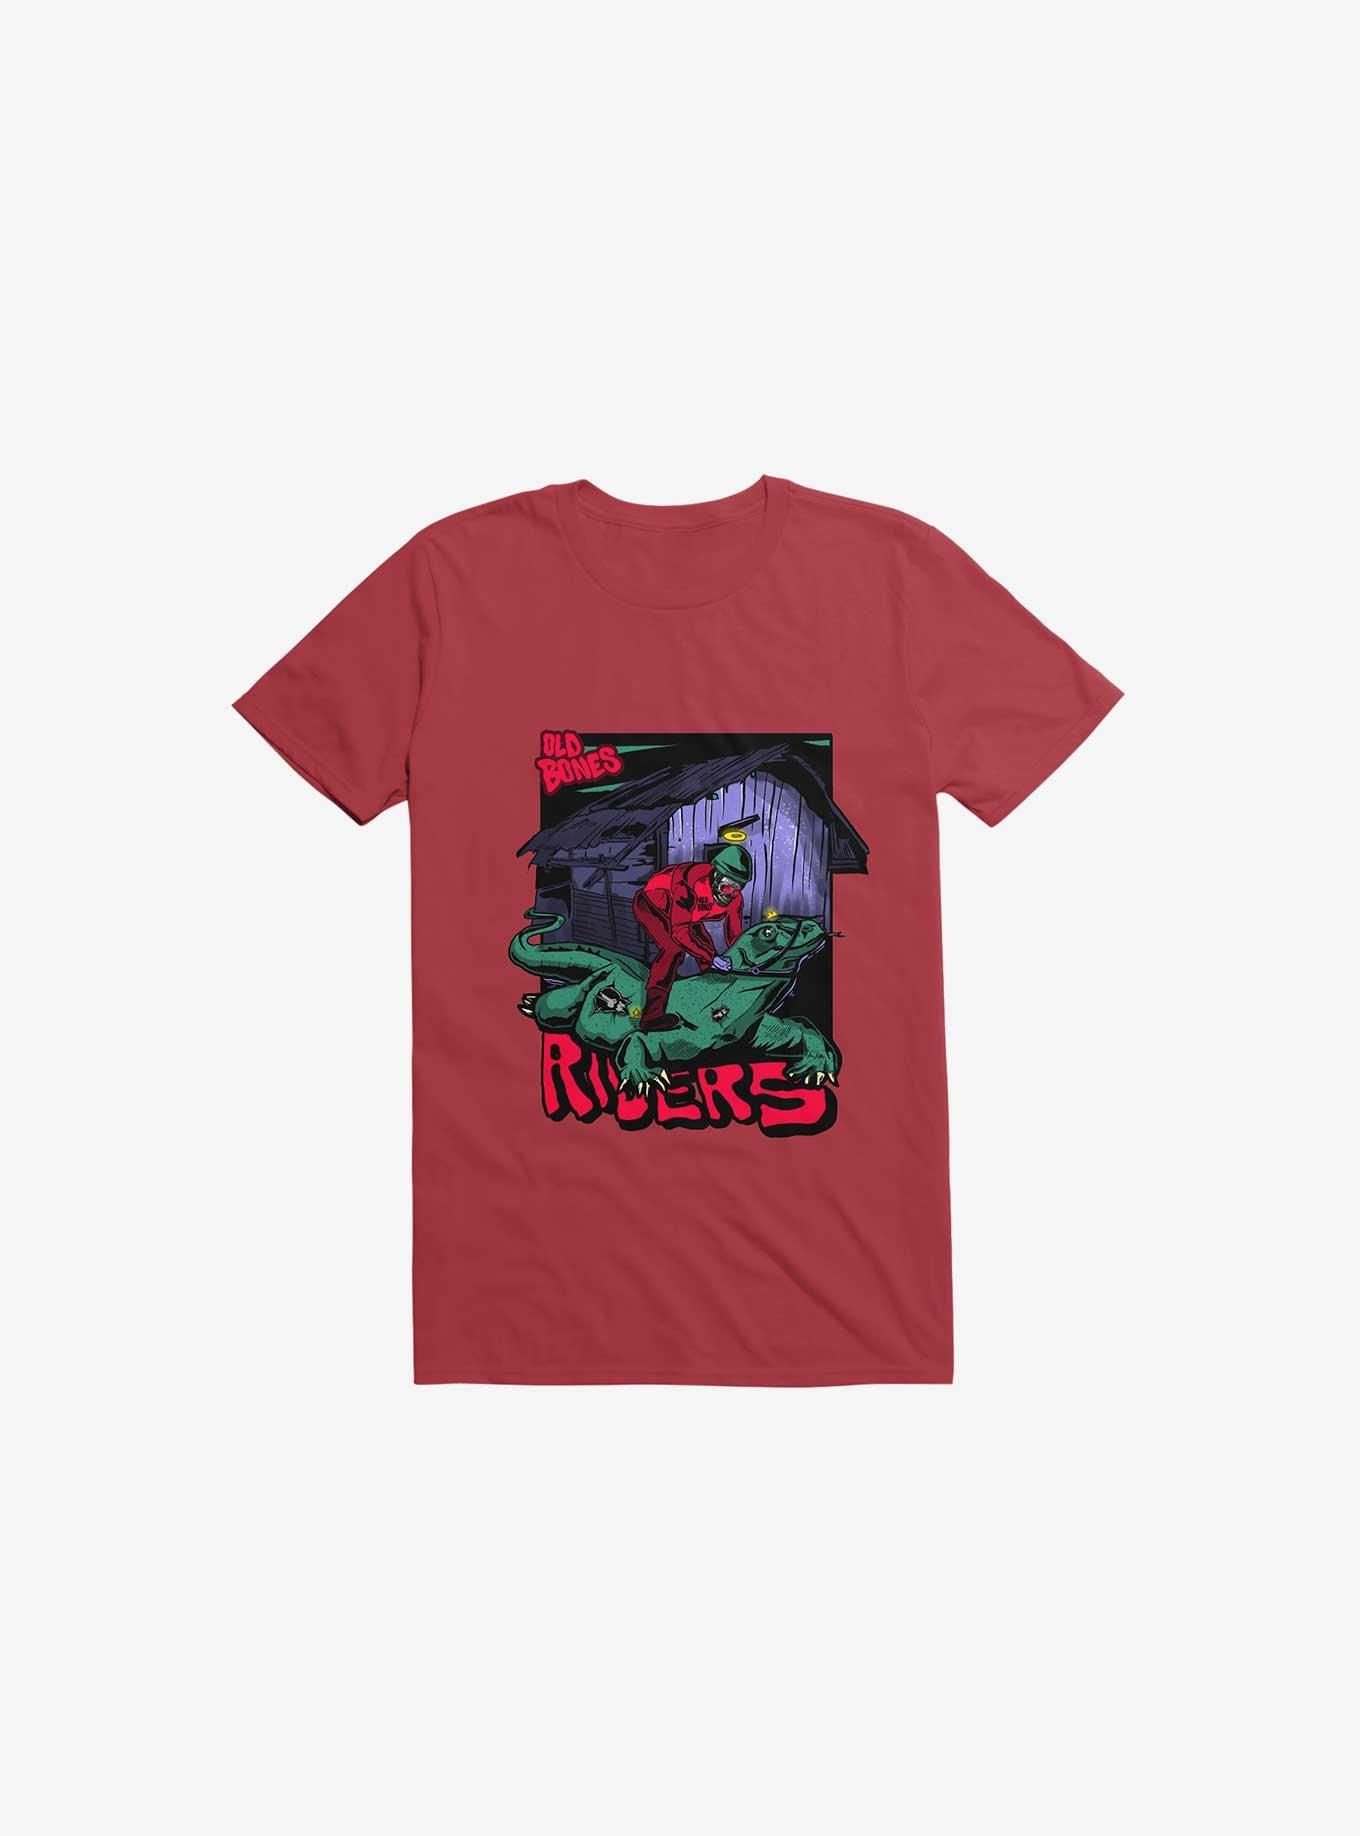 Riders Red T-Shirt, RED, hi-res